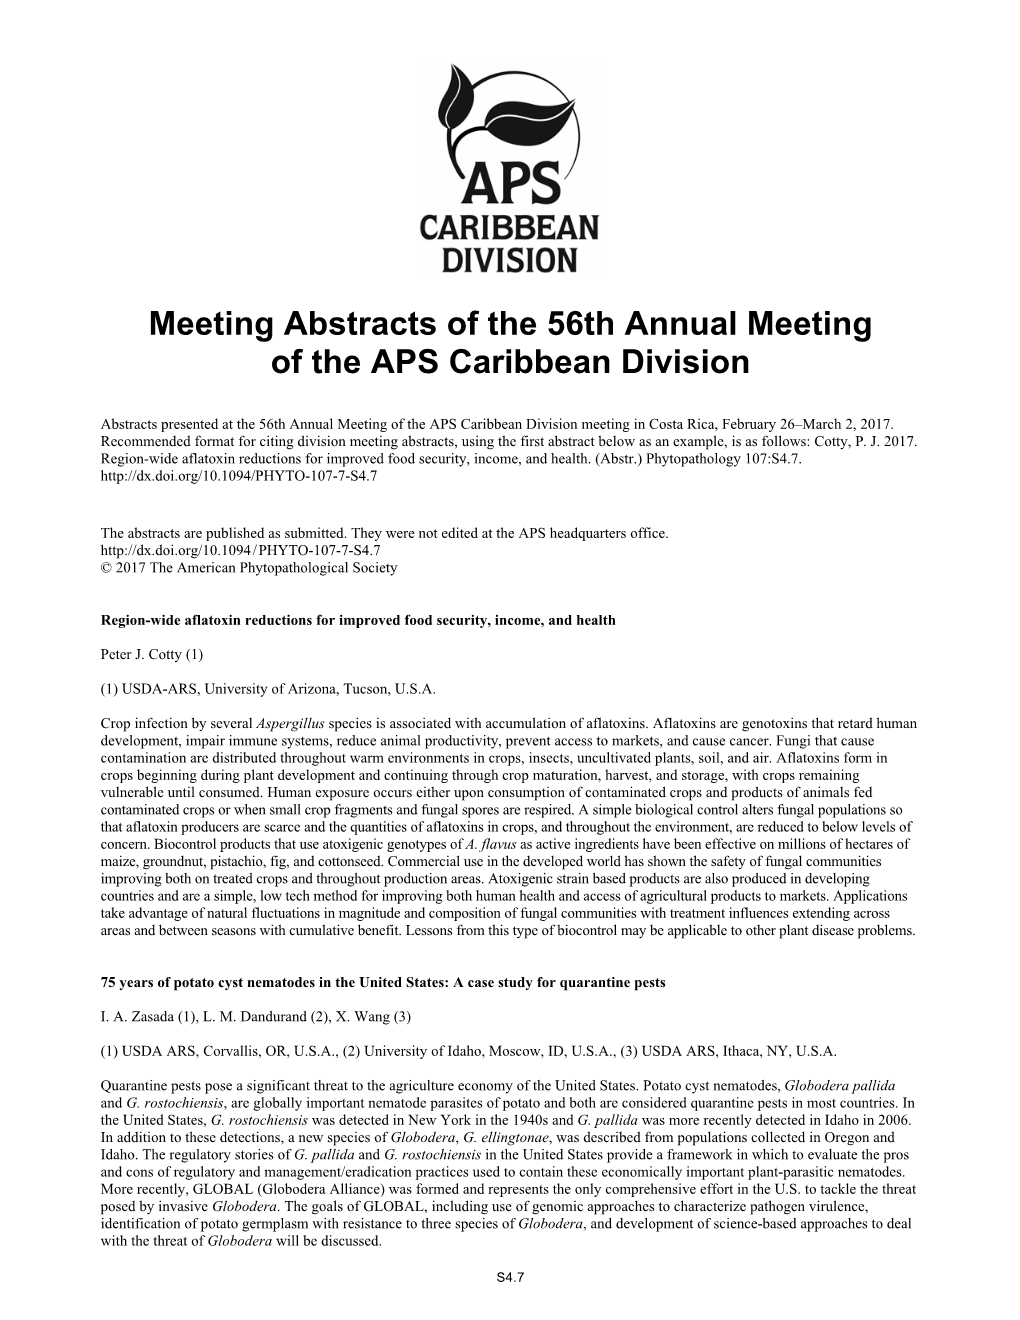 Meeting Abstracts of the 56Th Annual Meeting of the APS Caribbean Division